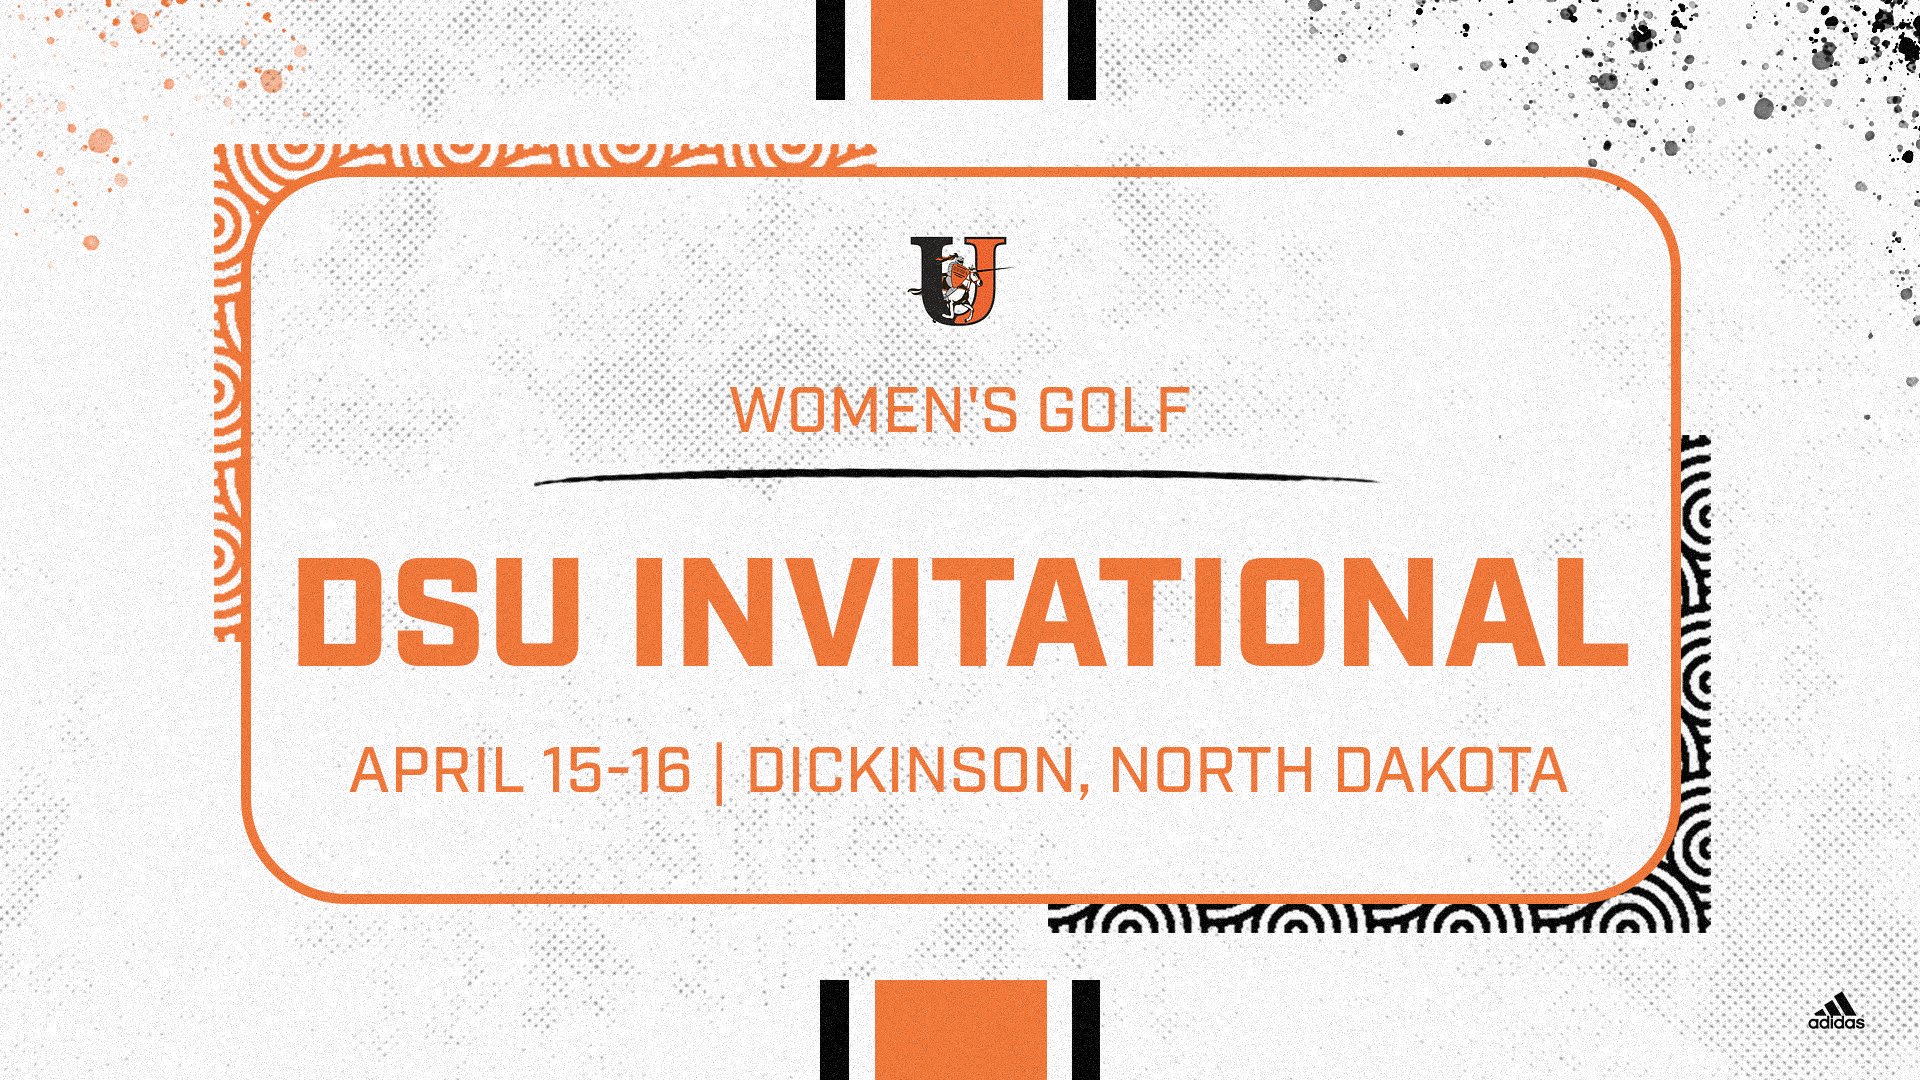 Jimmie women's golf teams place second and fourth at DSU Invitational